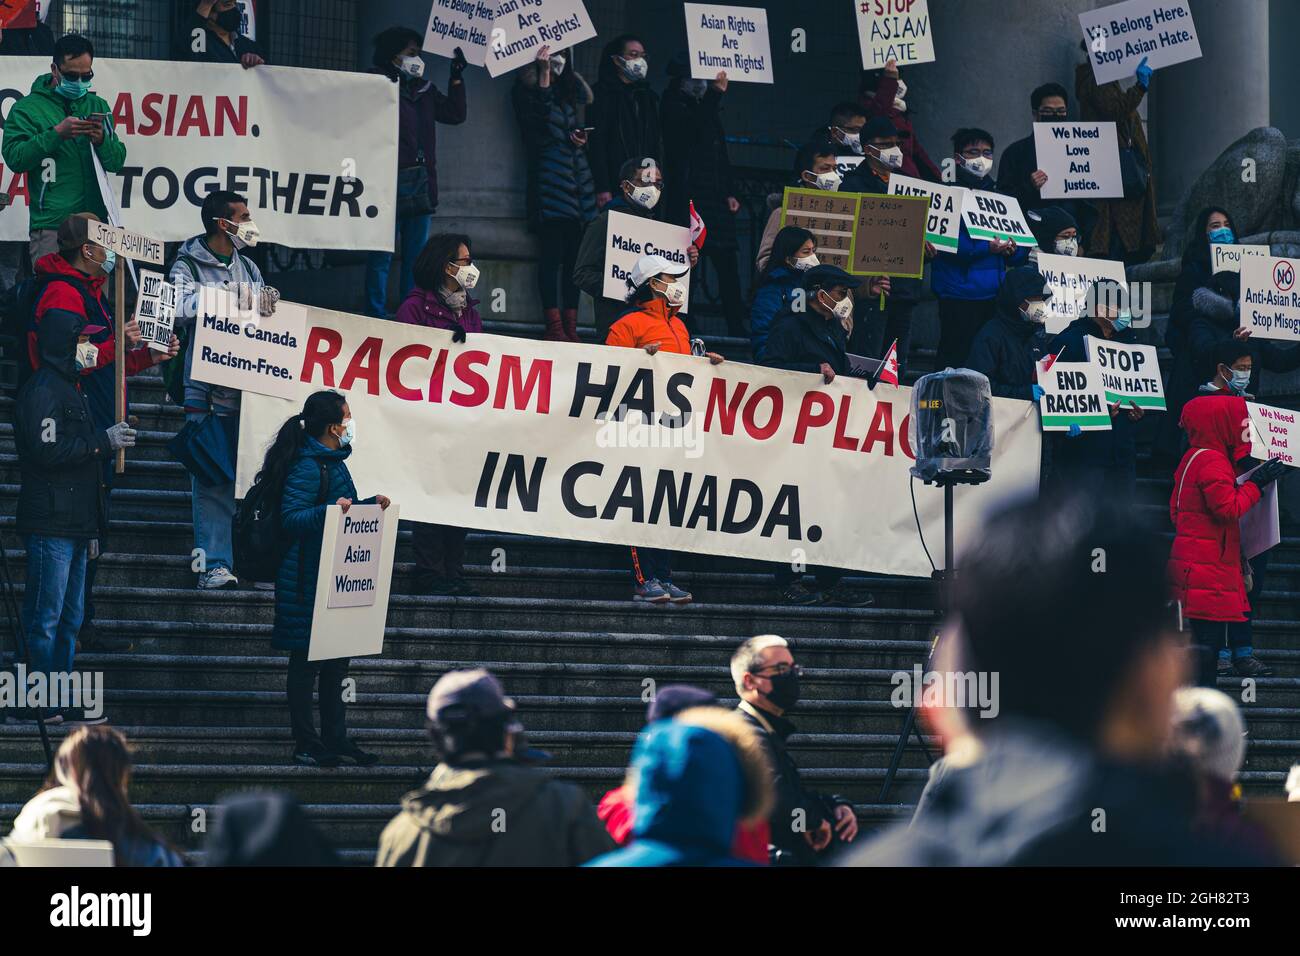 VANCOUVER, CANADA - Apr 12, 2021: The people on steps holding up a sign Racism has no place in Canada Stock Photo